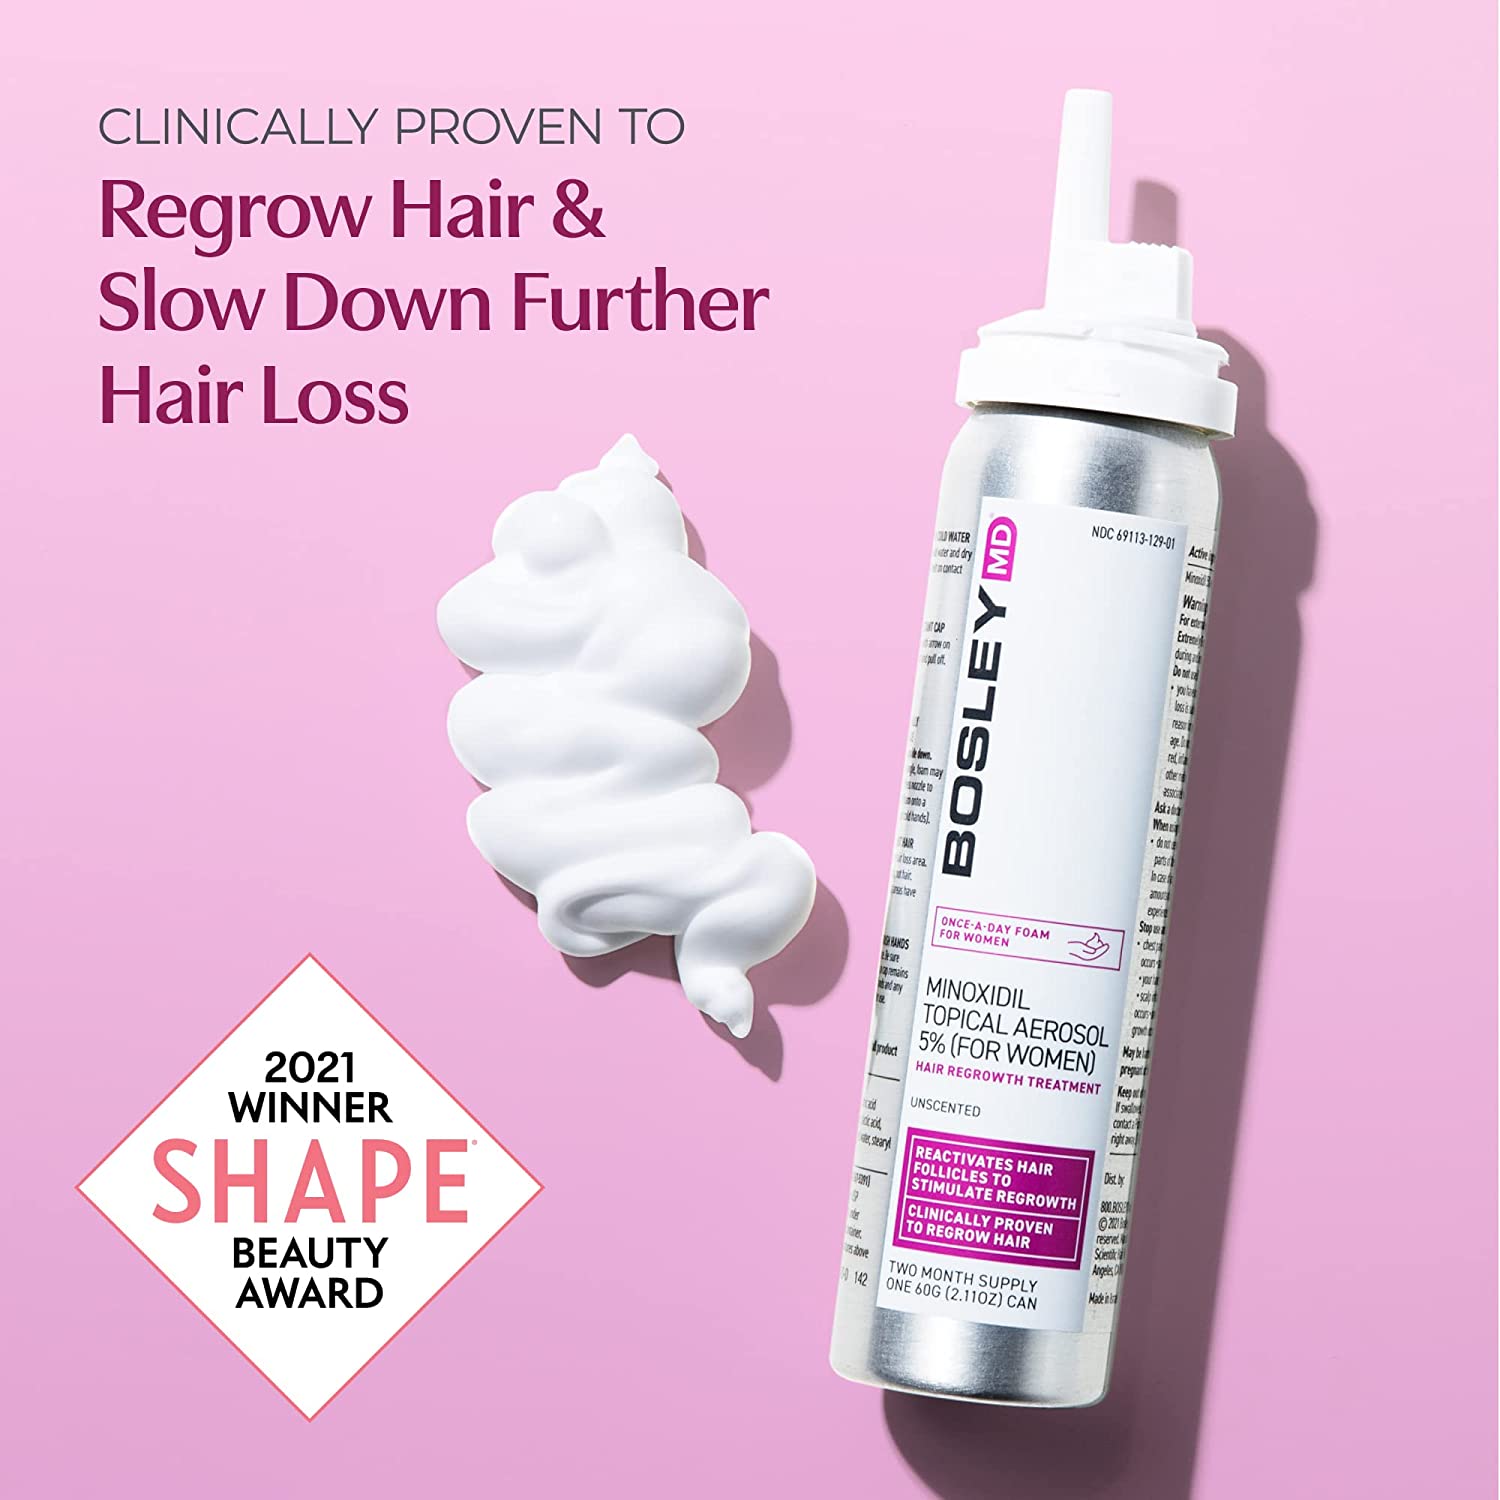 BosleyMD Hair Regrowth Foam: Clinically proven to regrow hair for men & women. 1 month supply. Exp 11/2023.